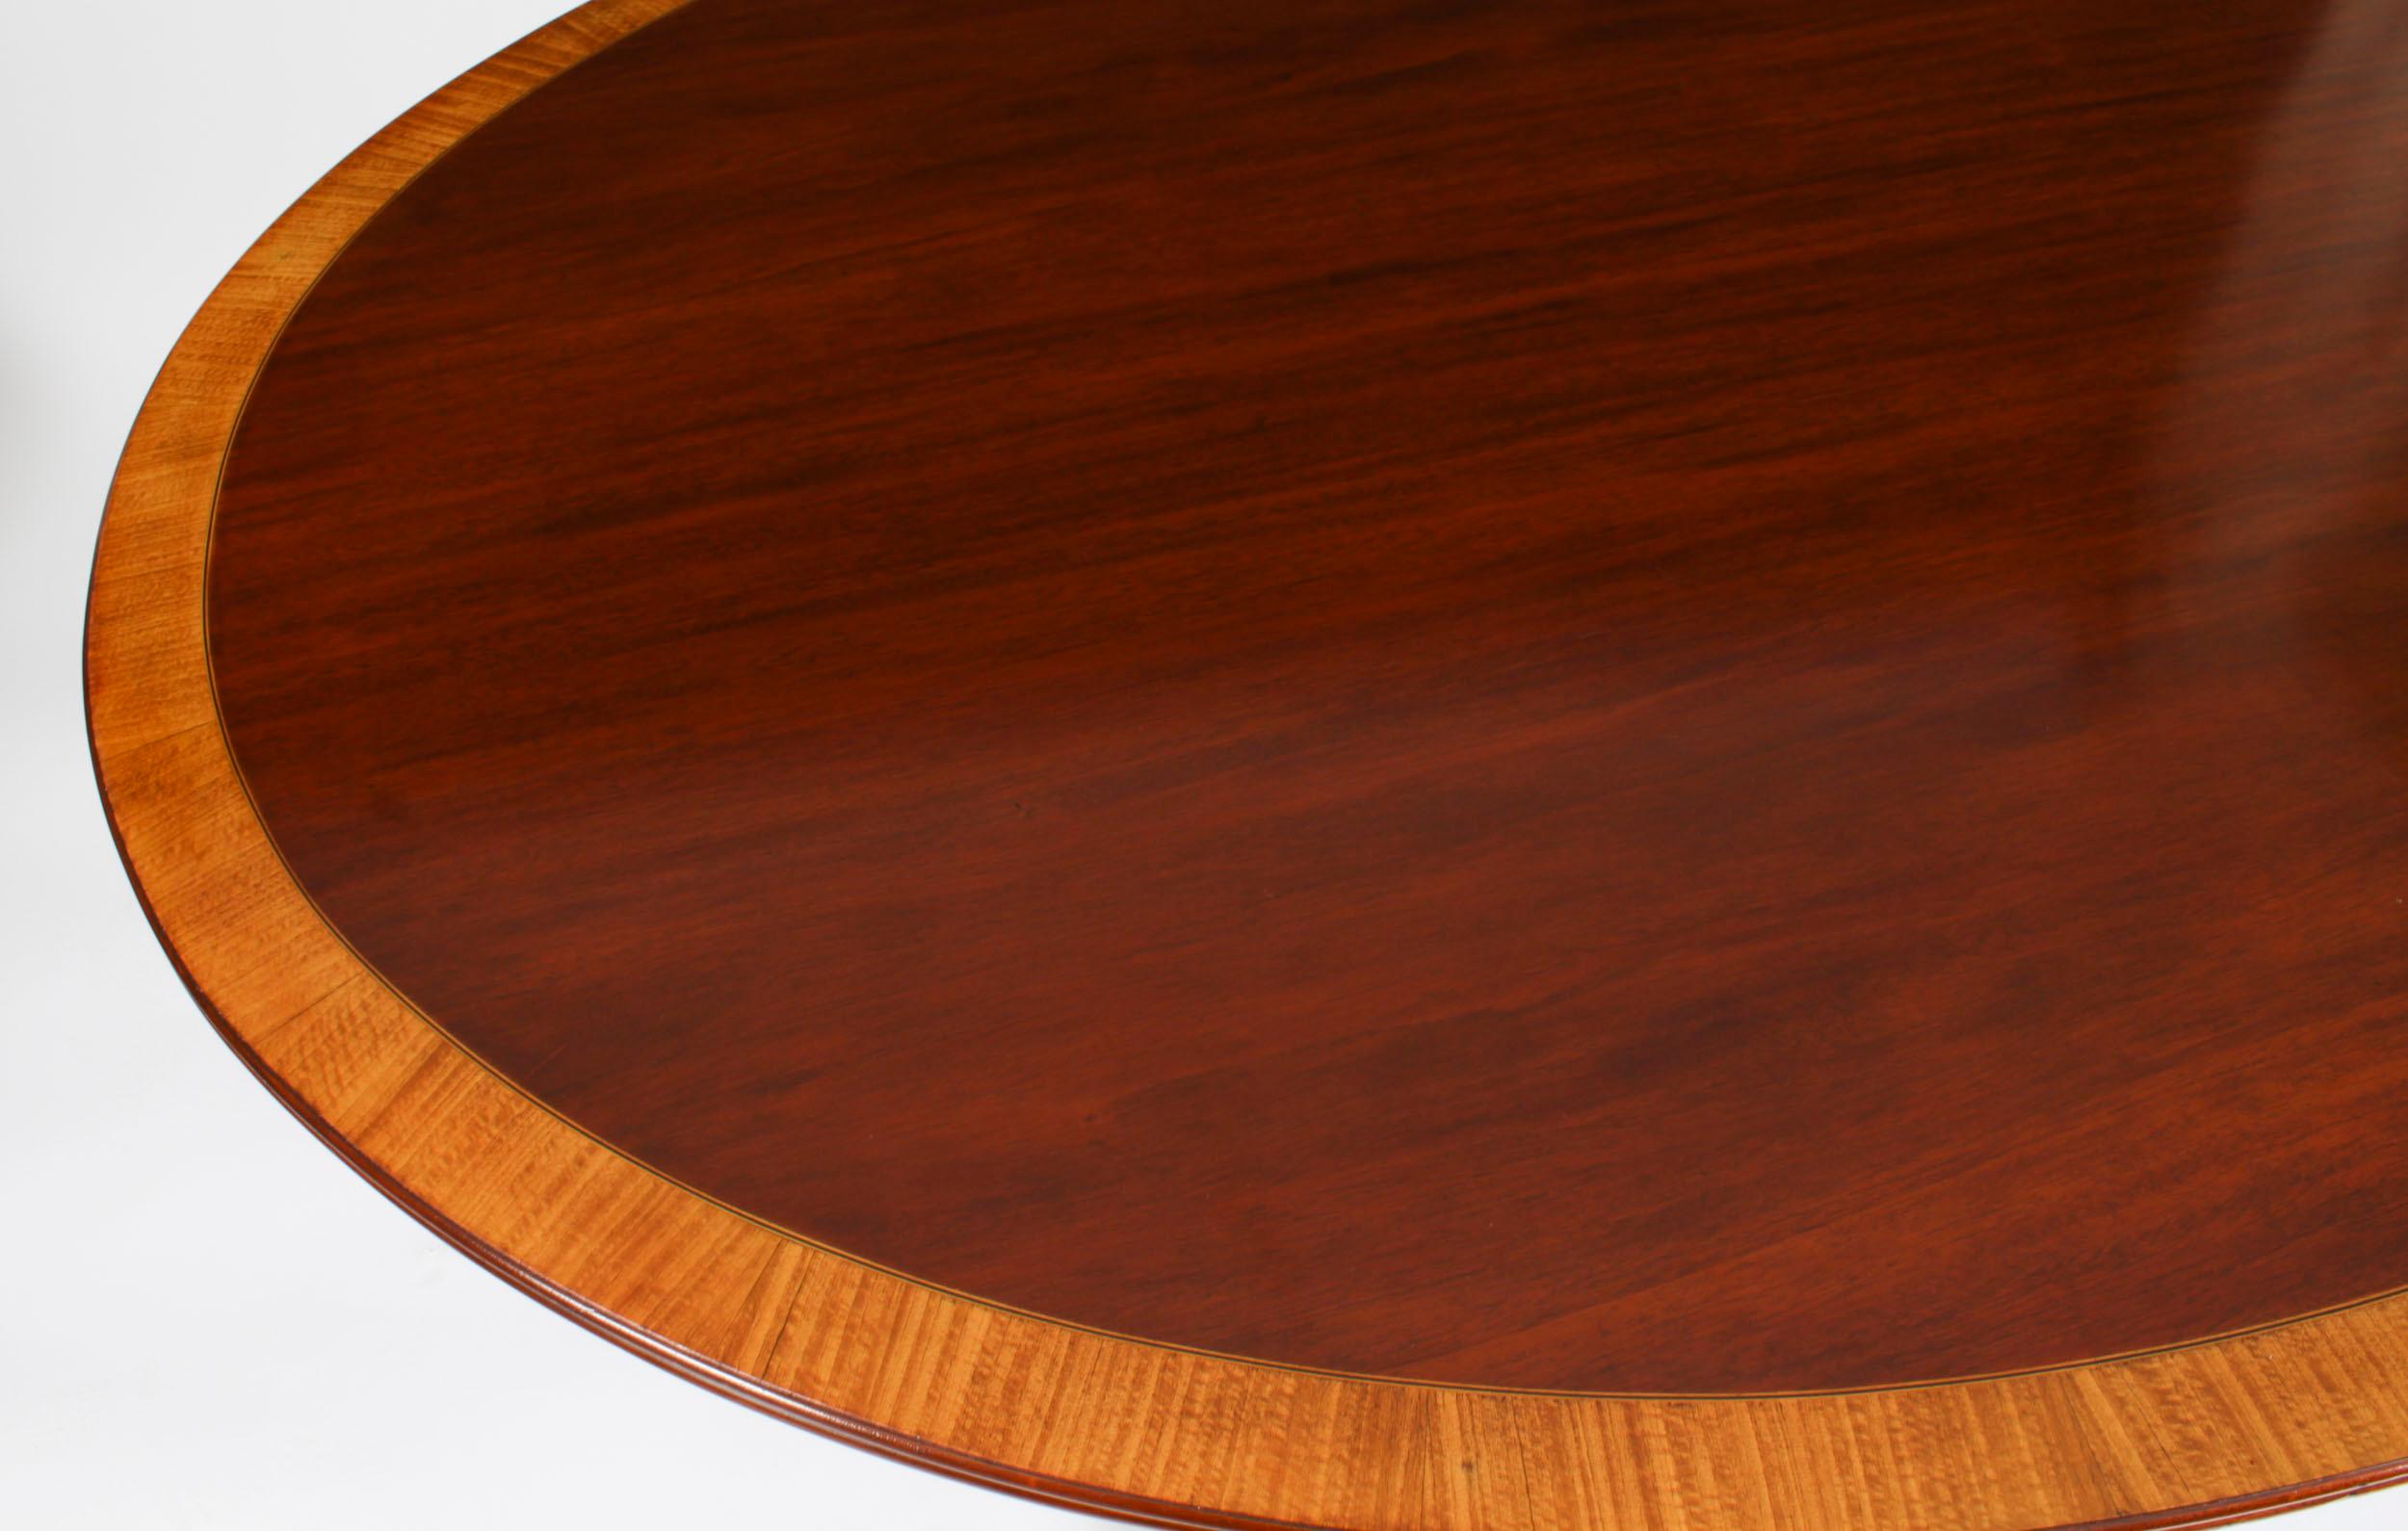 Antique Oval Mahogany Tilt Top Dining Table, Early 20th Century For Sale 3